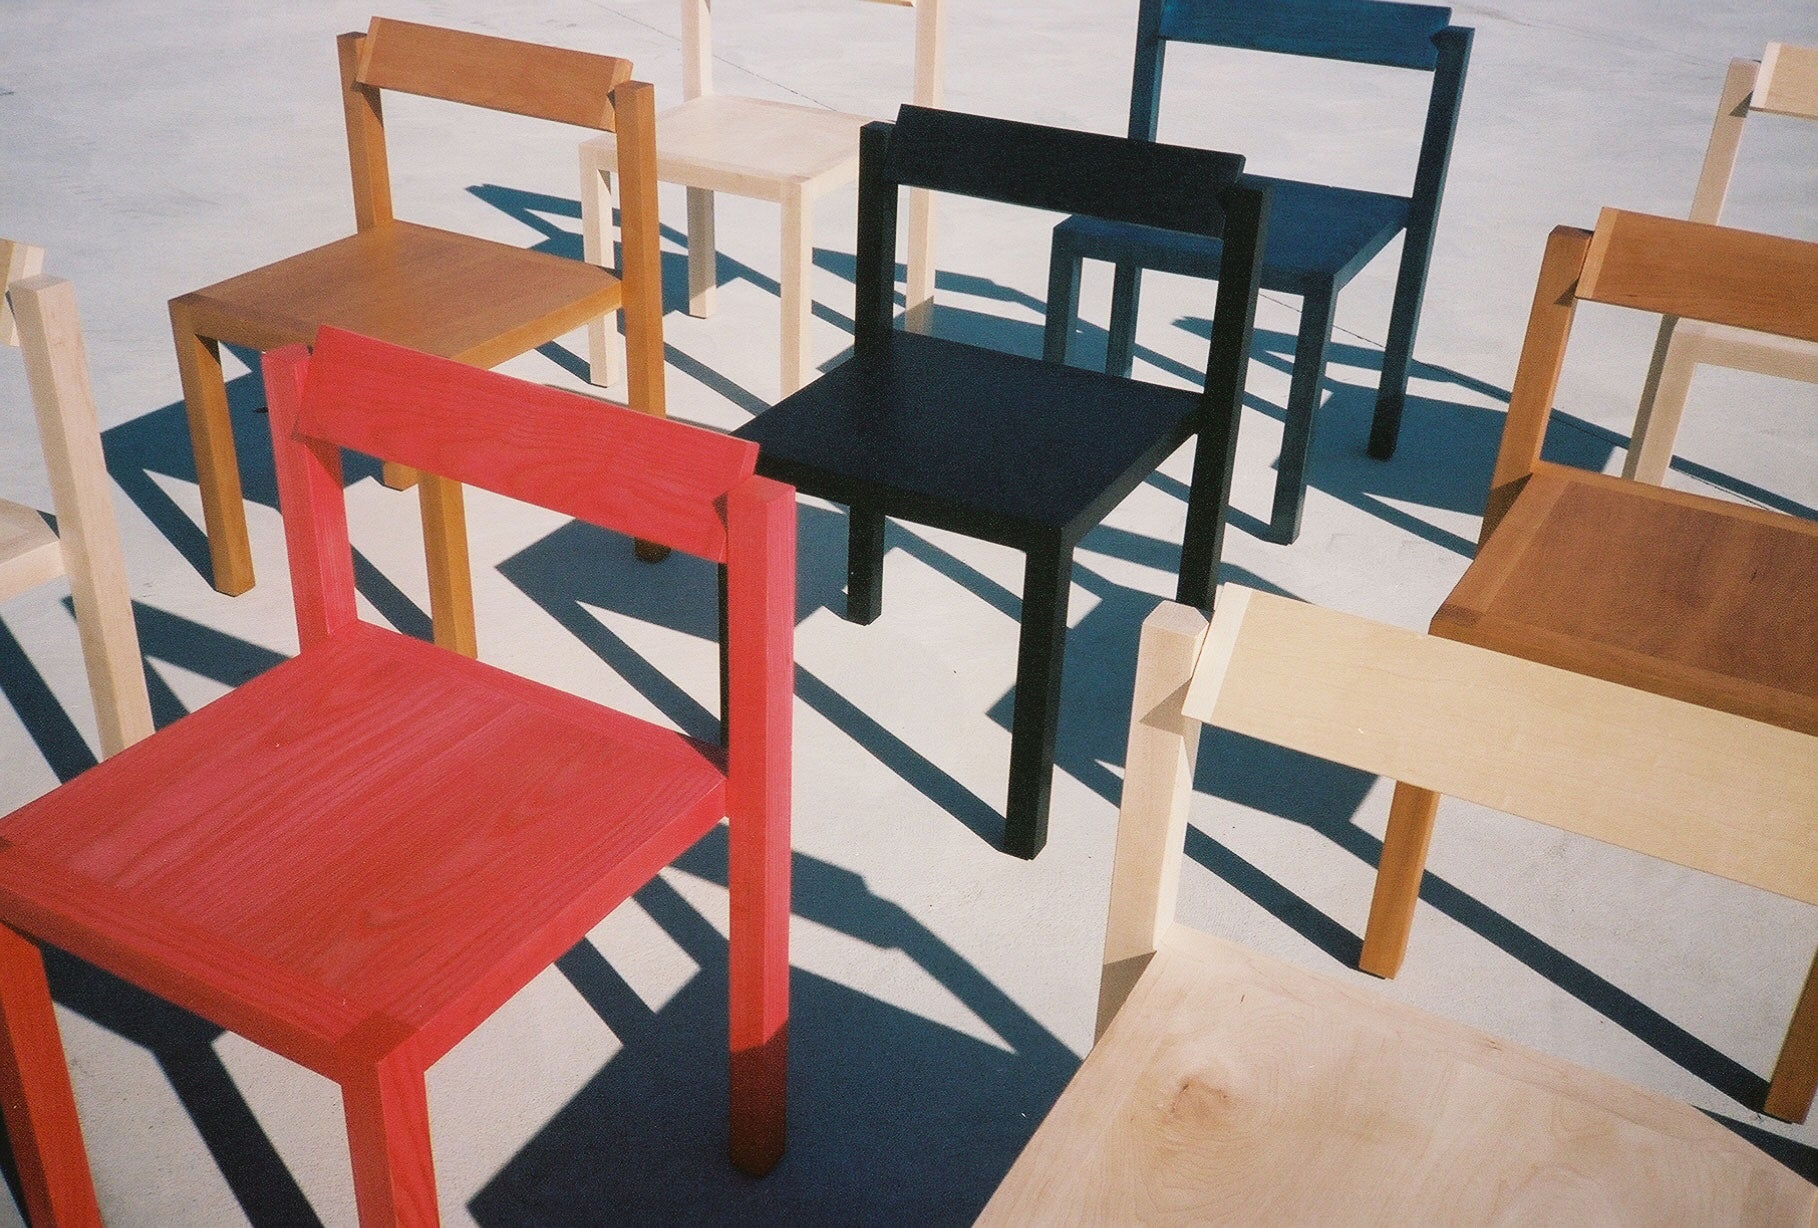 Red, Black, Blue, and an assortment of natural finish Anything Chairs arranged on concrete.